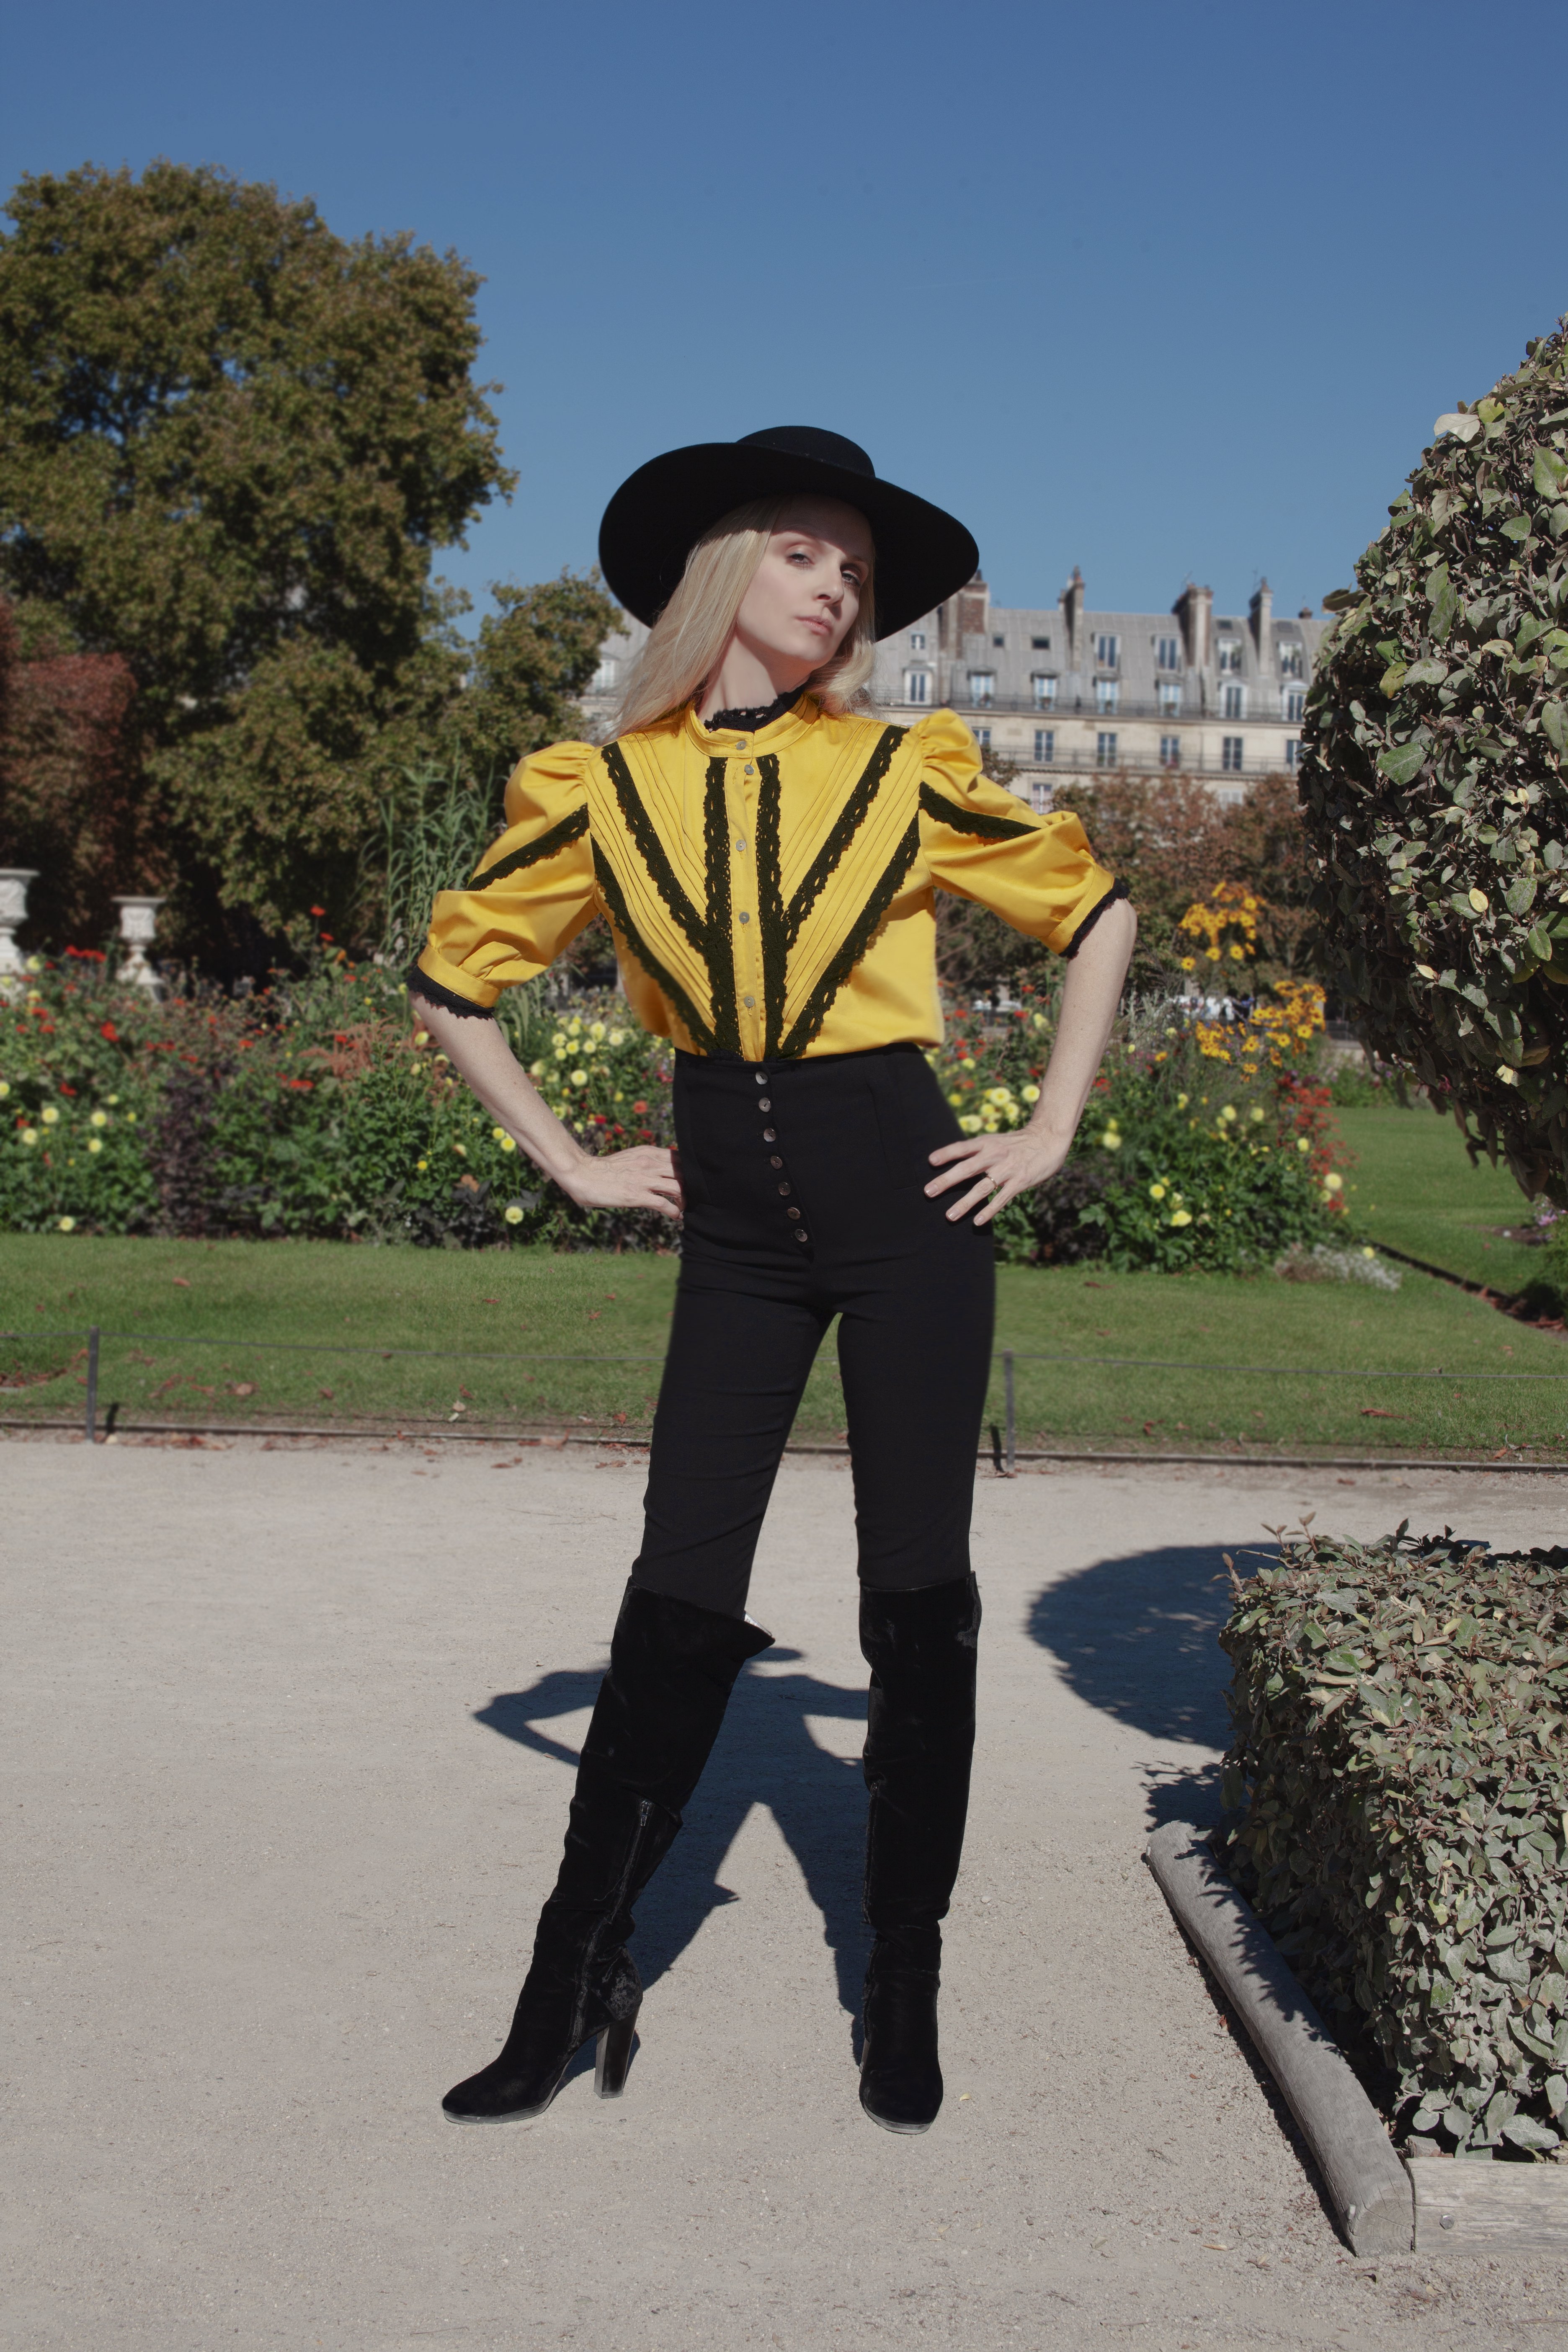 Sofia Achaval De Montaigu wearing Yegua Shirt in Yellow Cotton Satin paired with Palo pants in Black Cotton Satin and styled with the Gaucho Hat